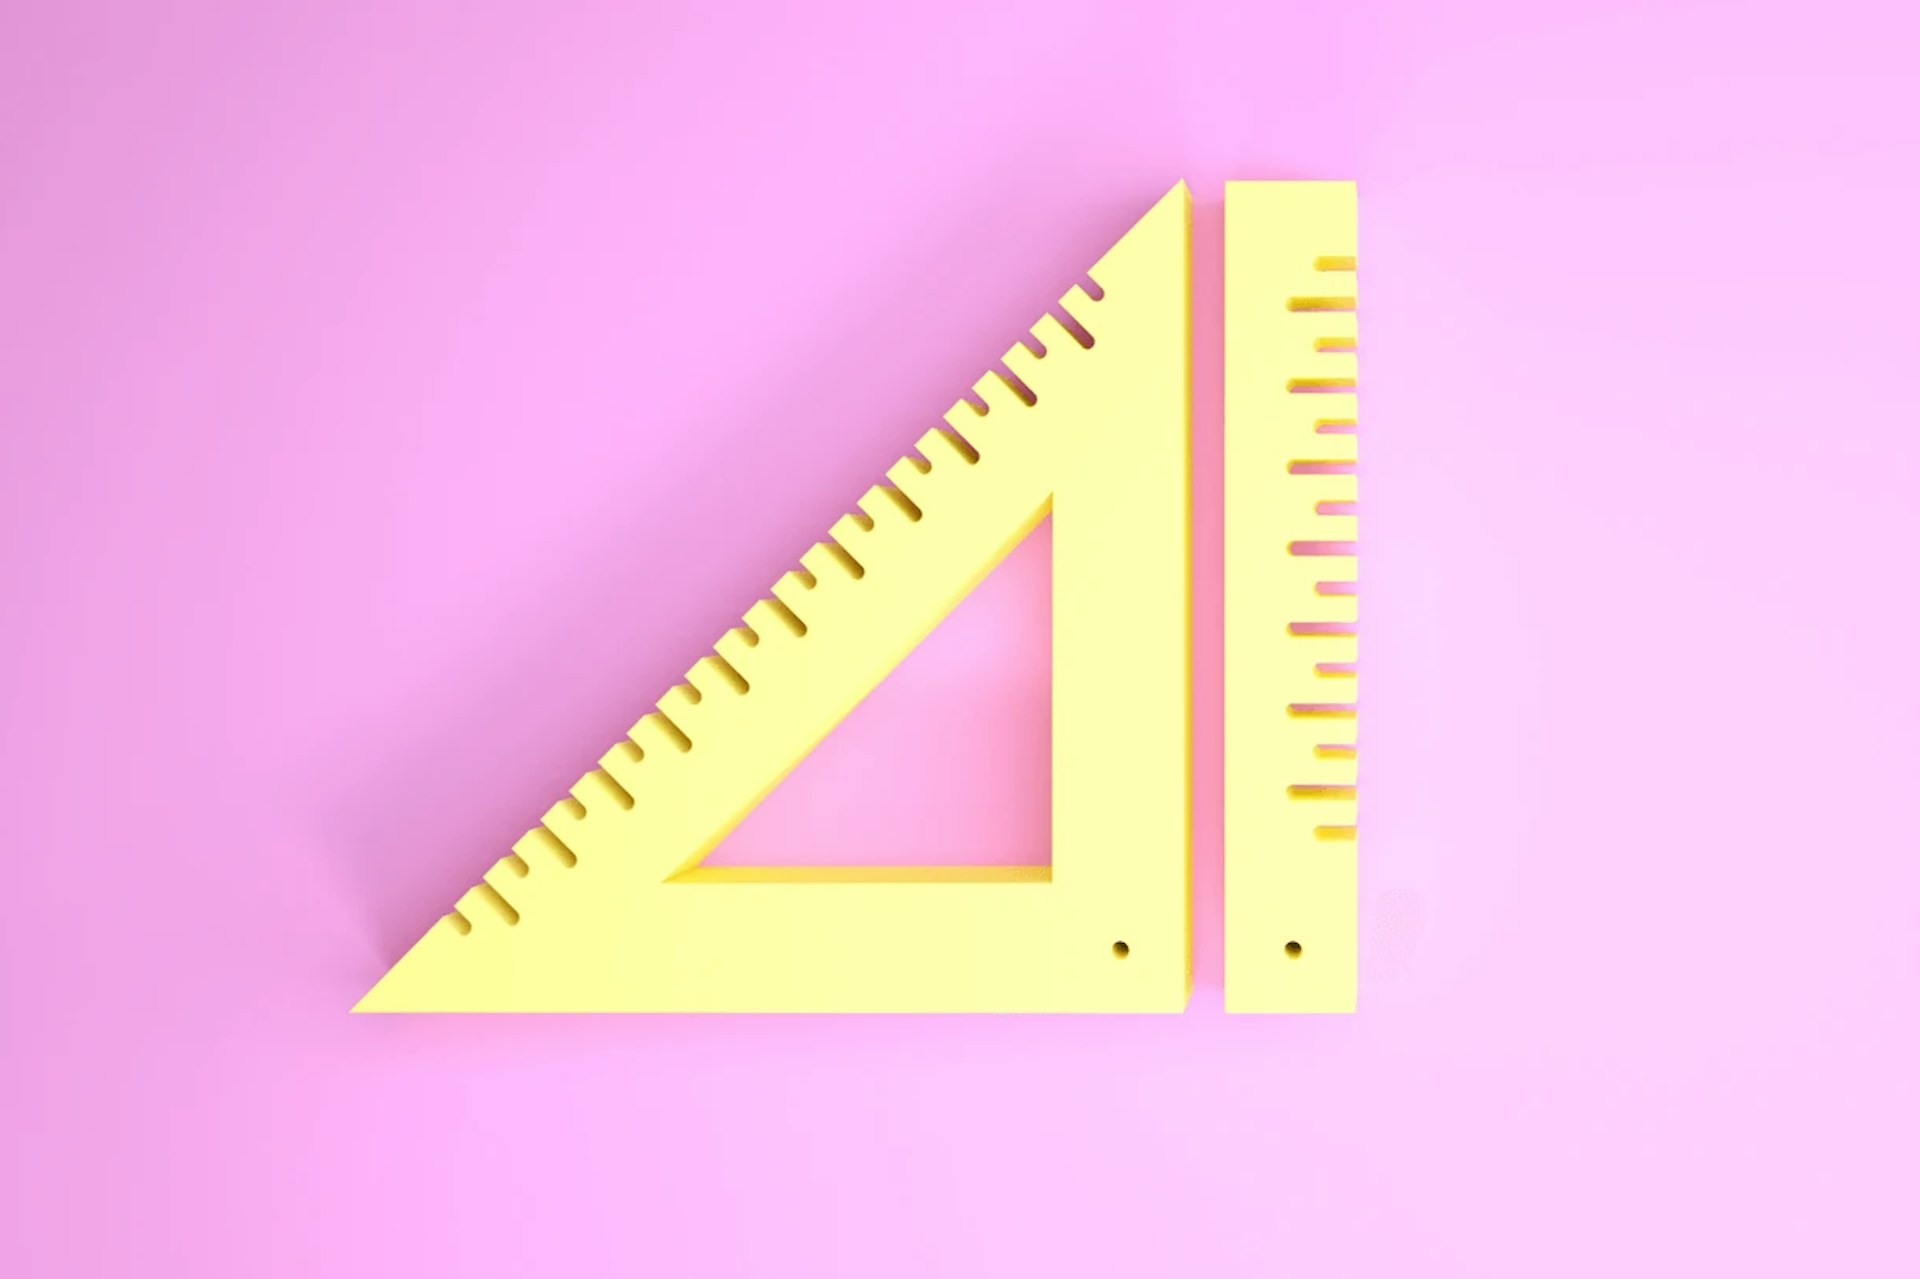 illustration of a ruler for showcasing the best marketing campaign measurement tools